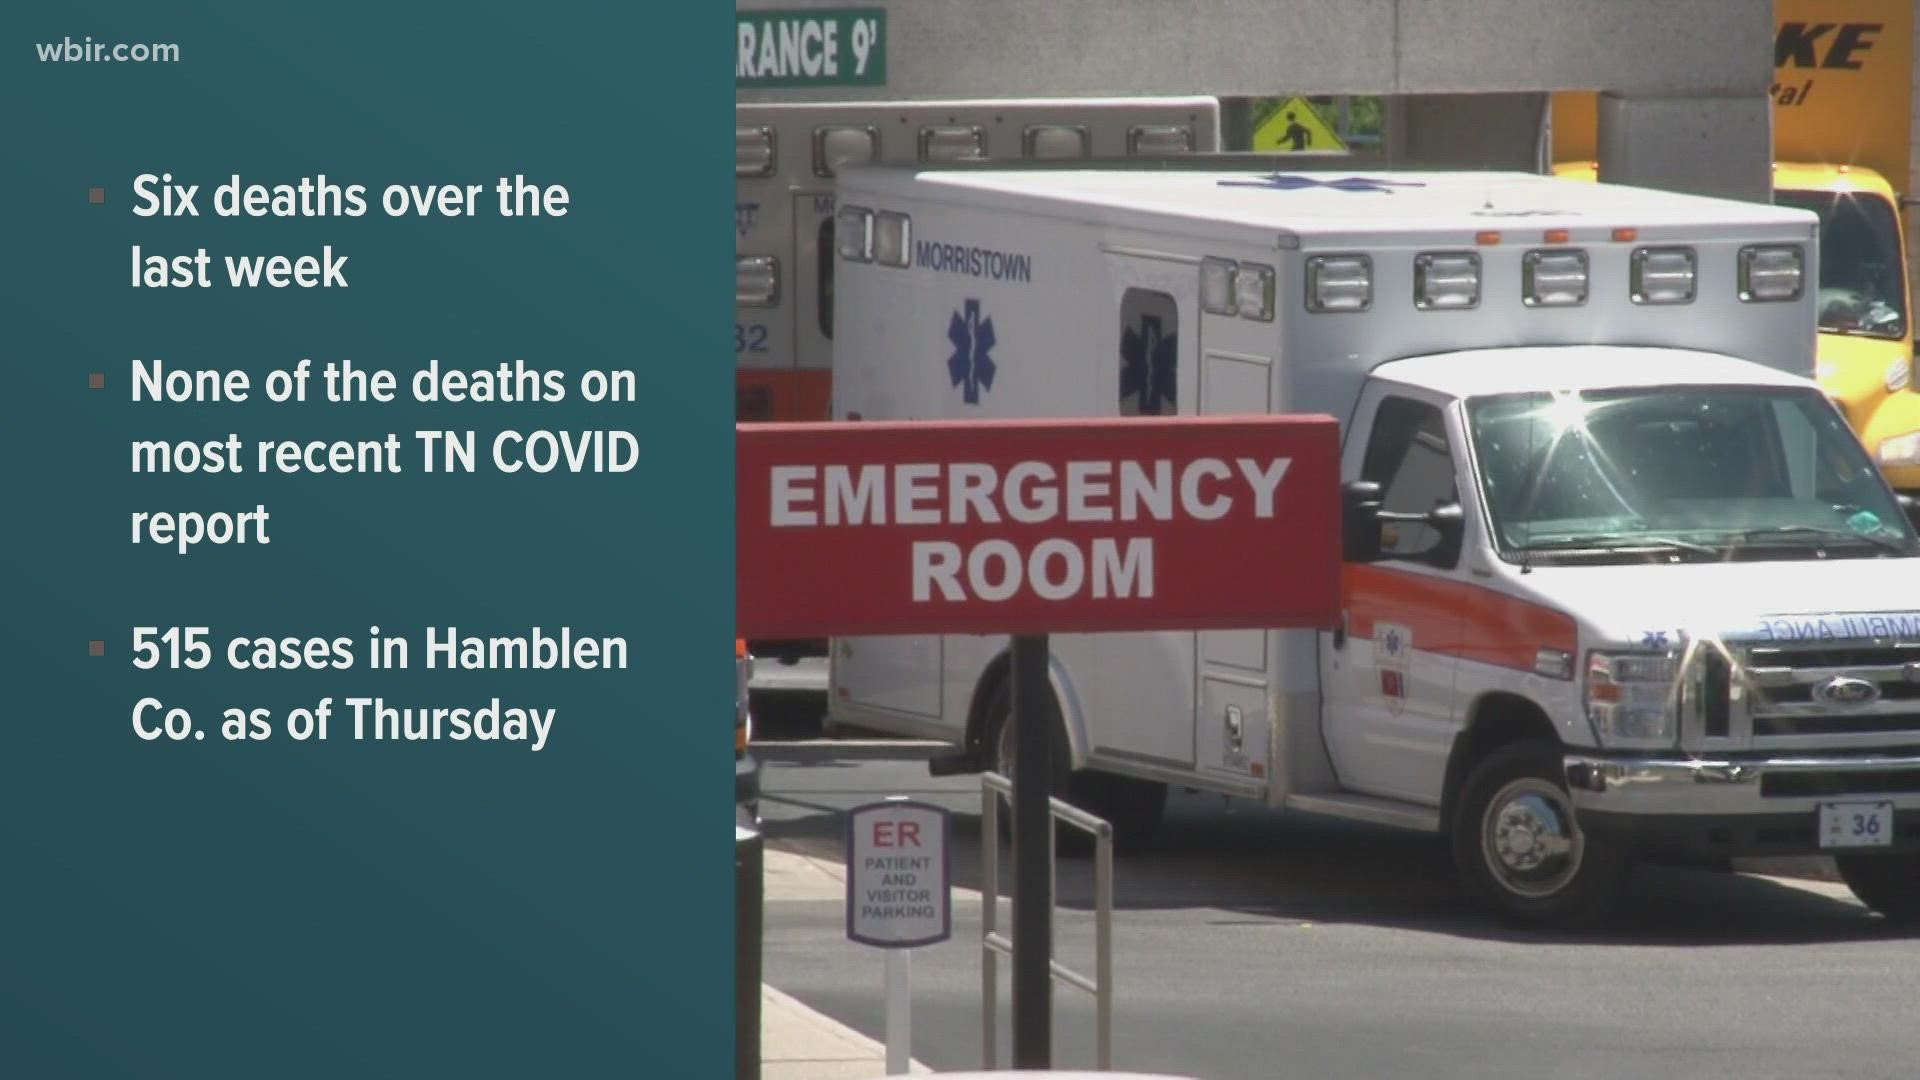 Reports said that none of the deaths are accounted for in the state's current COVID-19 reports since they can take 7 to 10 days to be added.